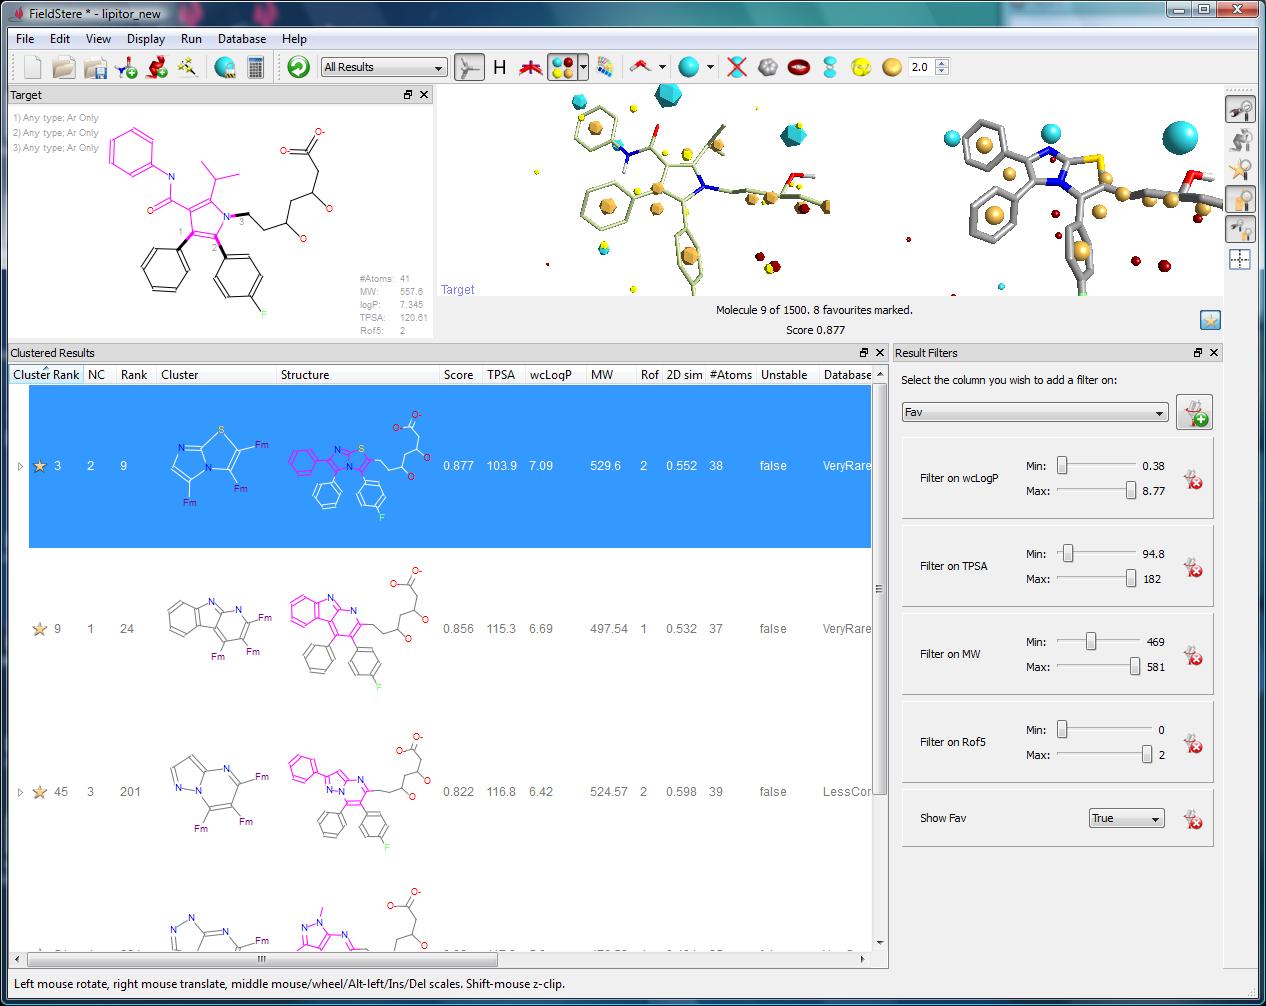 Screenshot from the new FieldStere 1.1 showing results of a search for Vioxx bioisosteres